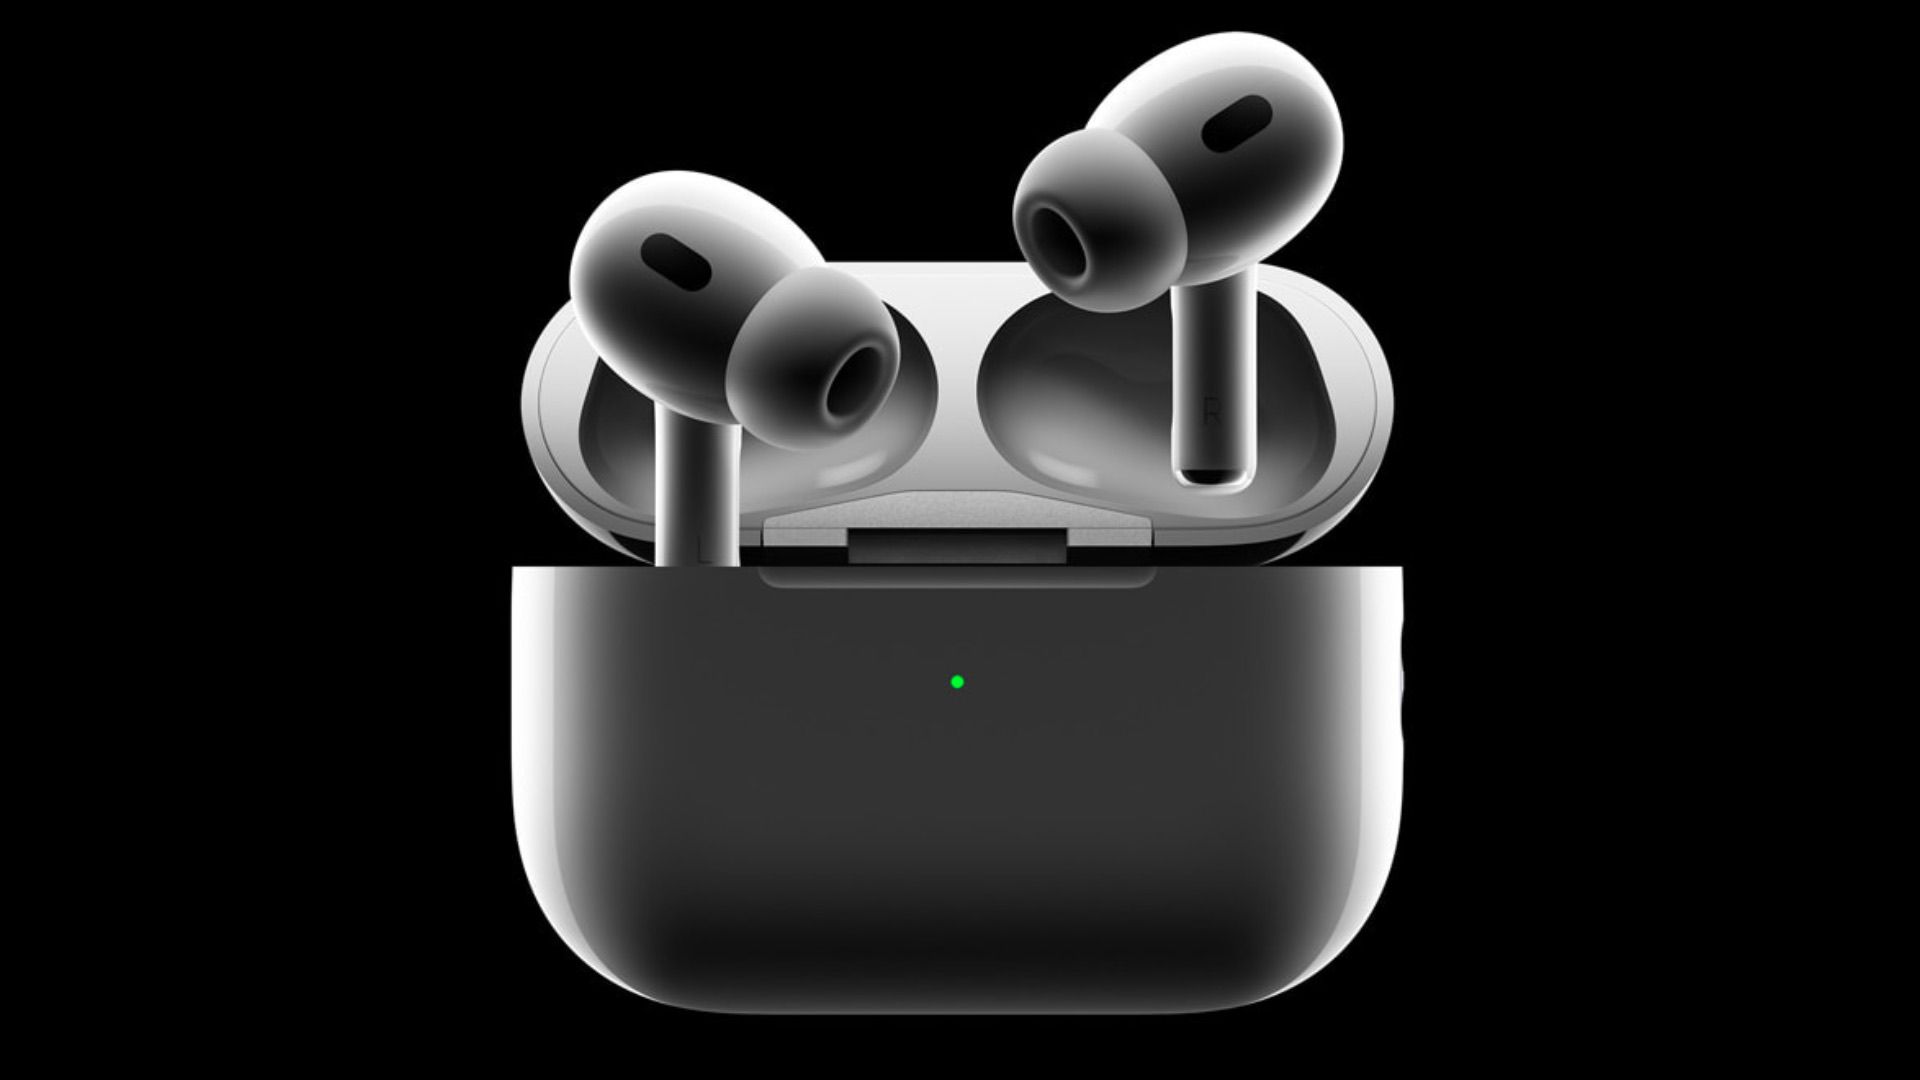 New AirPods Pro Do Not Support Lossless Apple Music